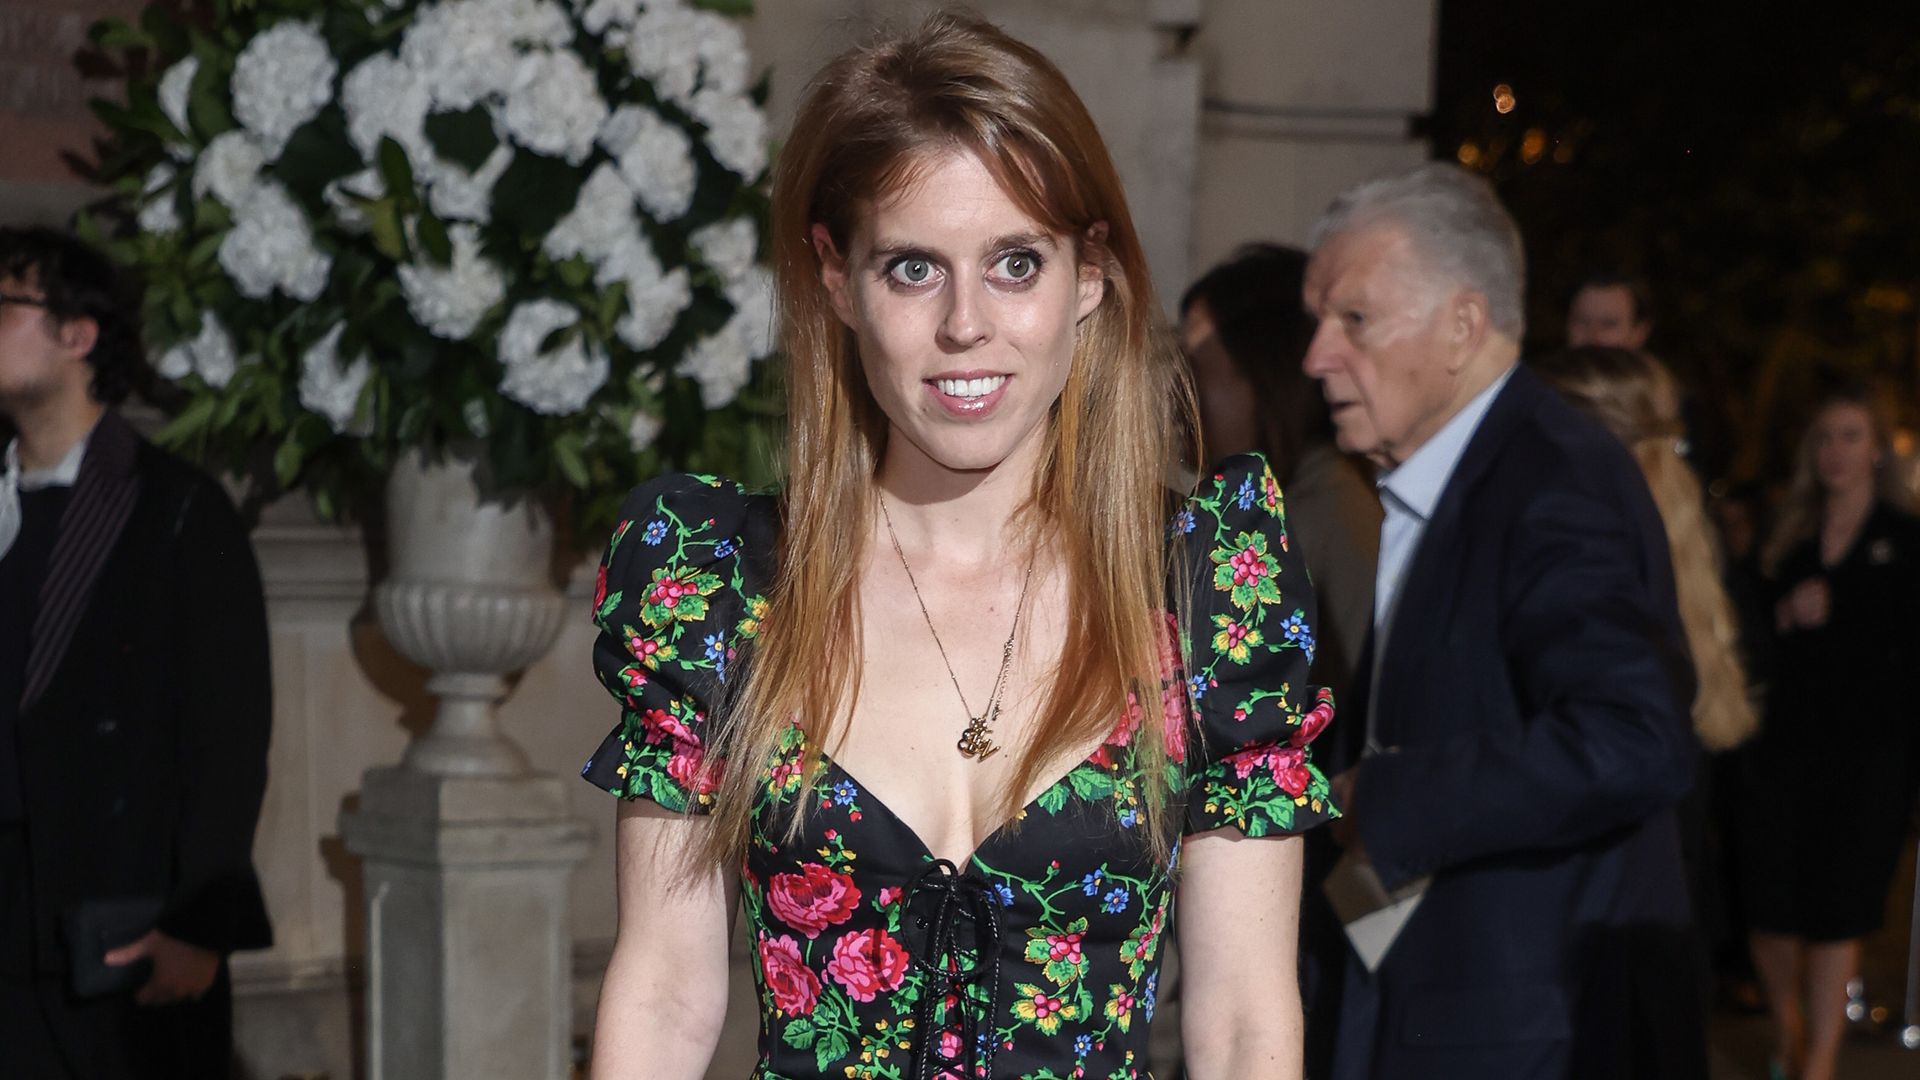 LONDON, ENGLAND - SEPTEMBER 13: Princess Beatrice attends the private view of "Gabrielle Chanel. Fashion Manifesto" at The V&A on September 13, 2023 in London, England. (Photo by Mike Marsland/WireImage)